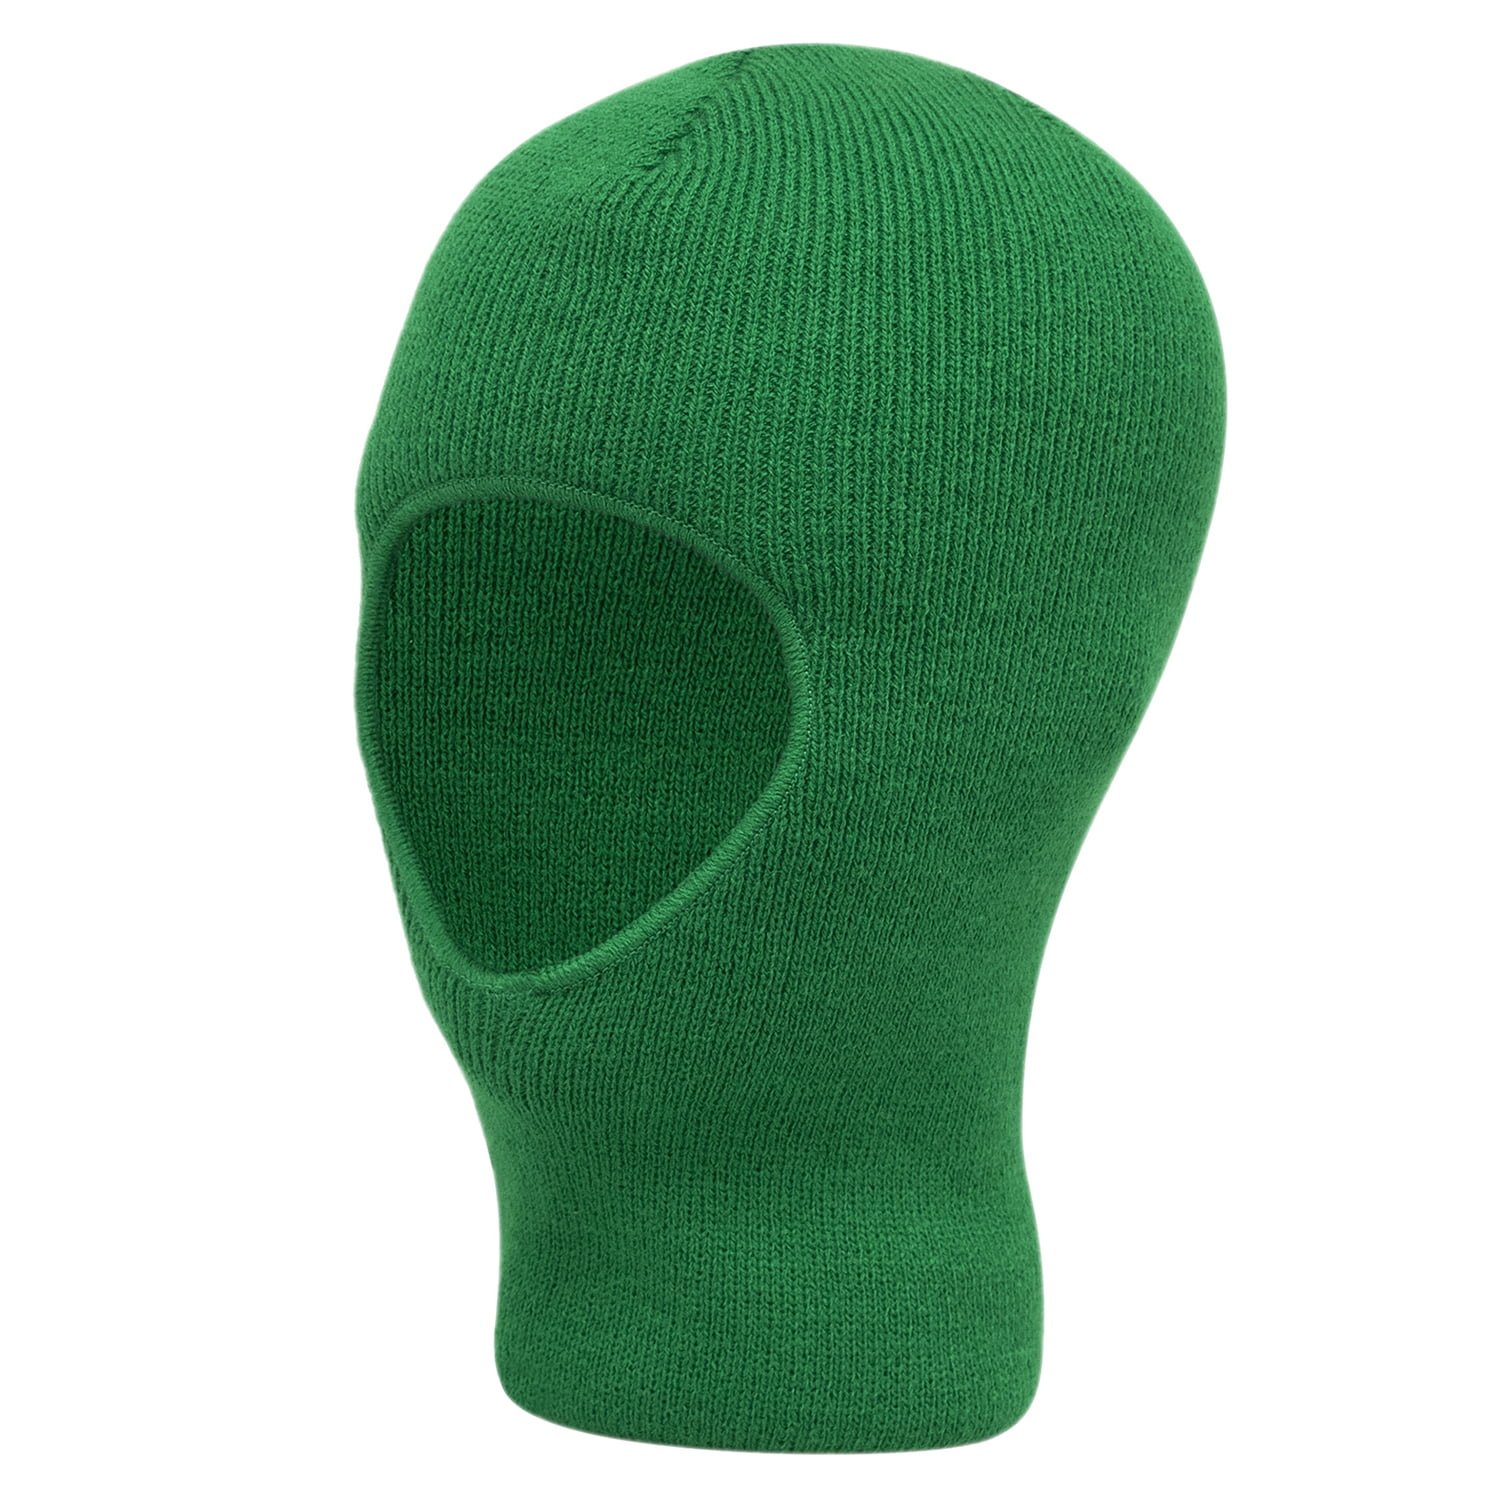 Kelly Green One Hole Thinsulate Ski Mask - Dozen Packed - Made in USA